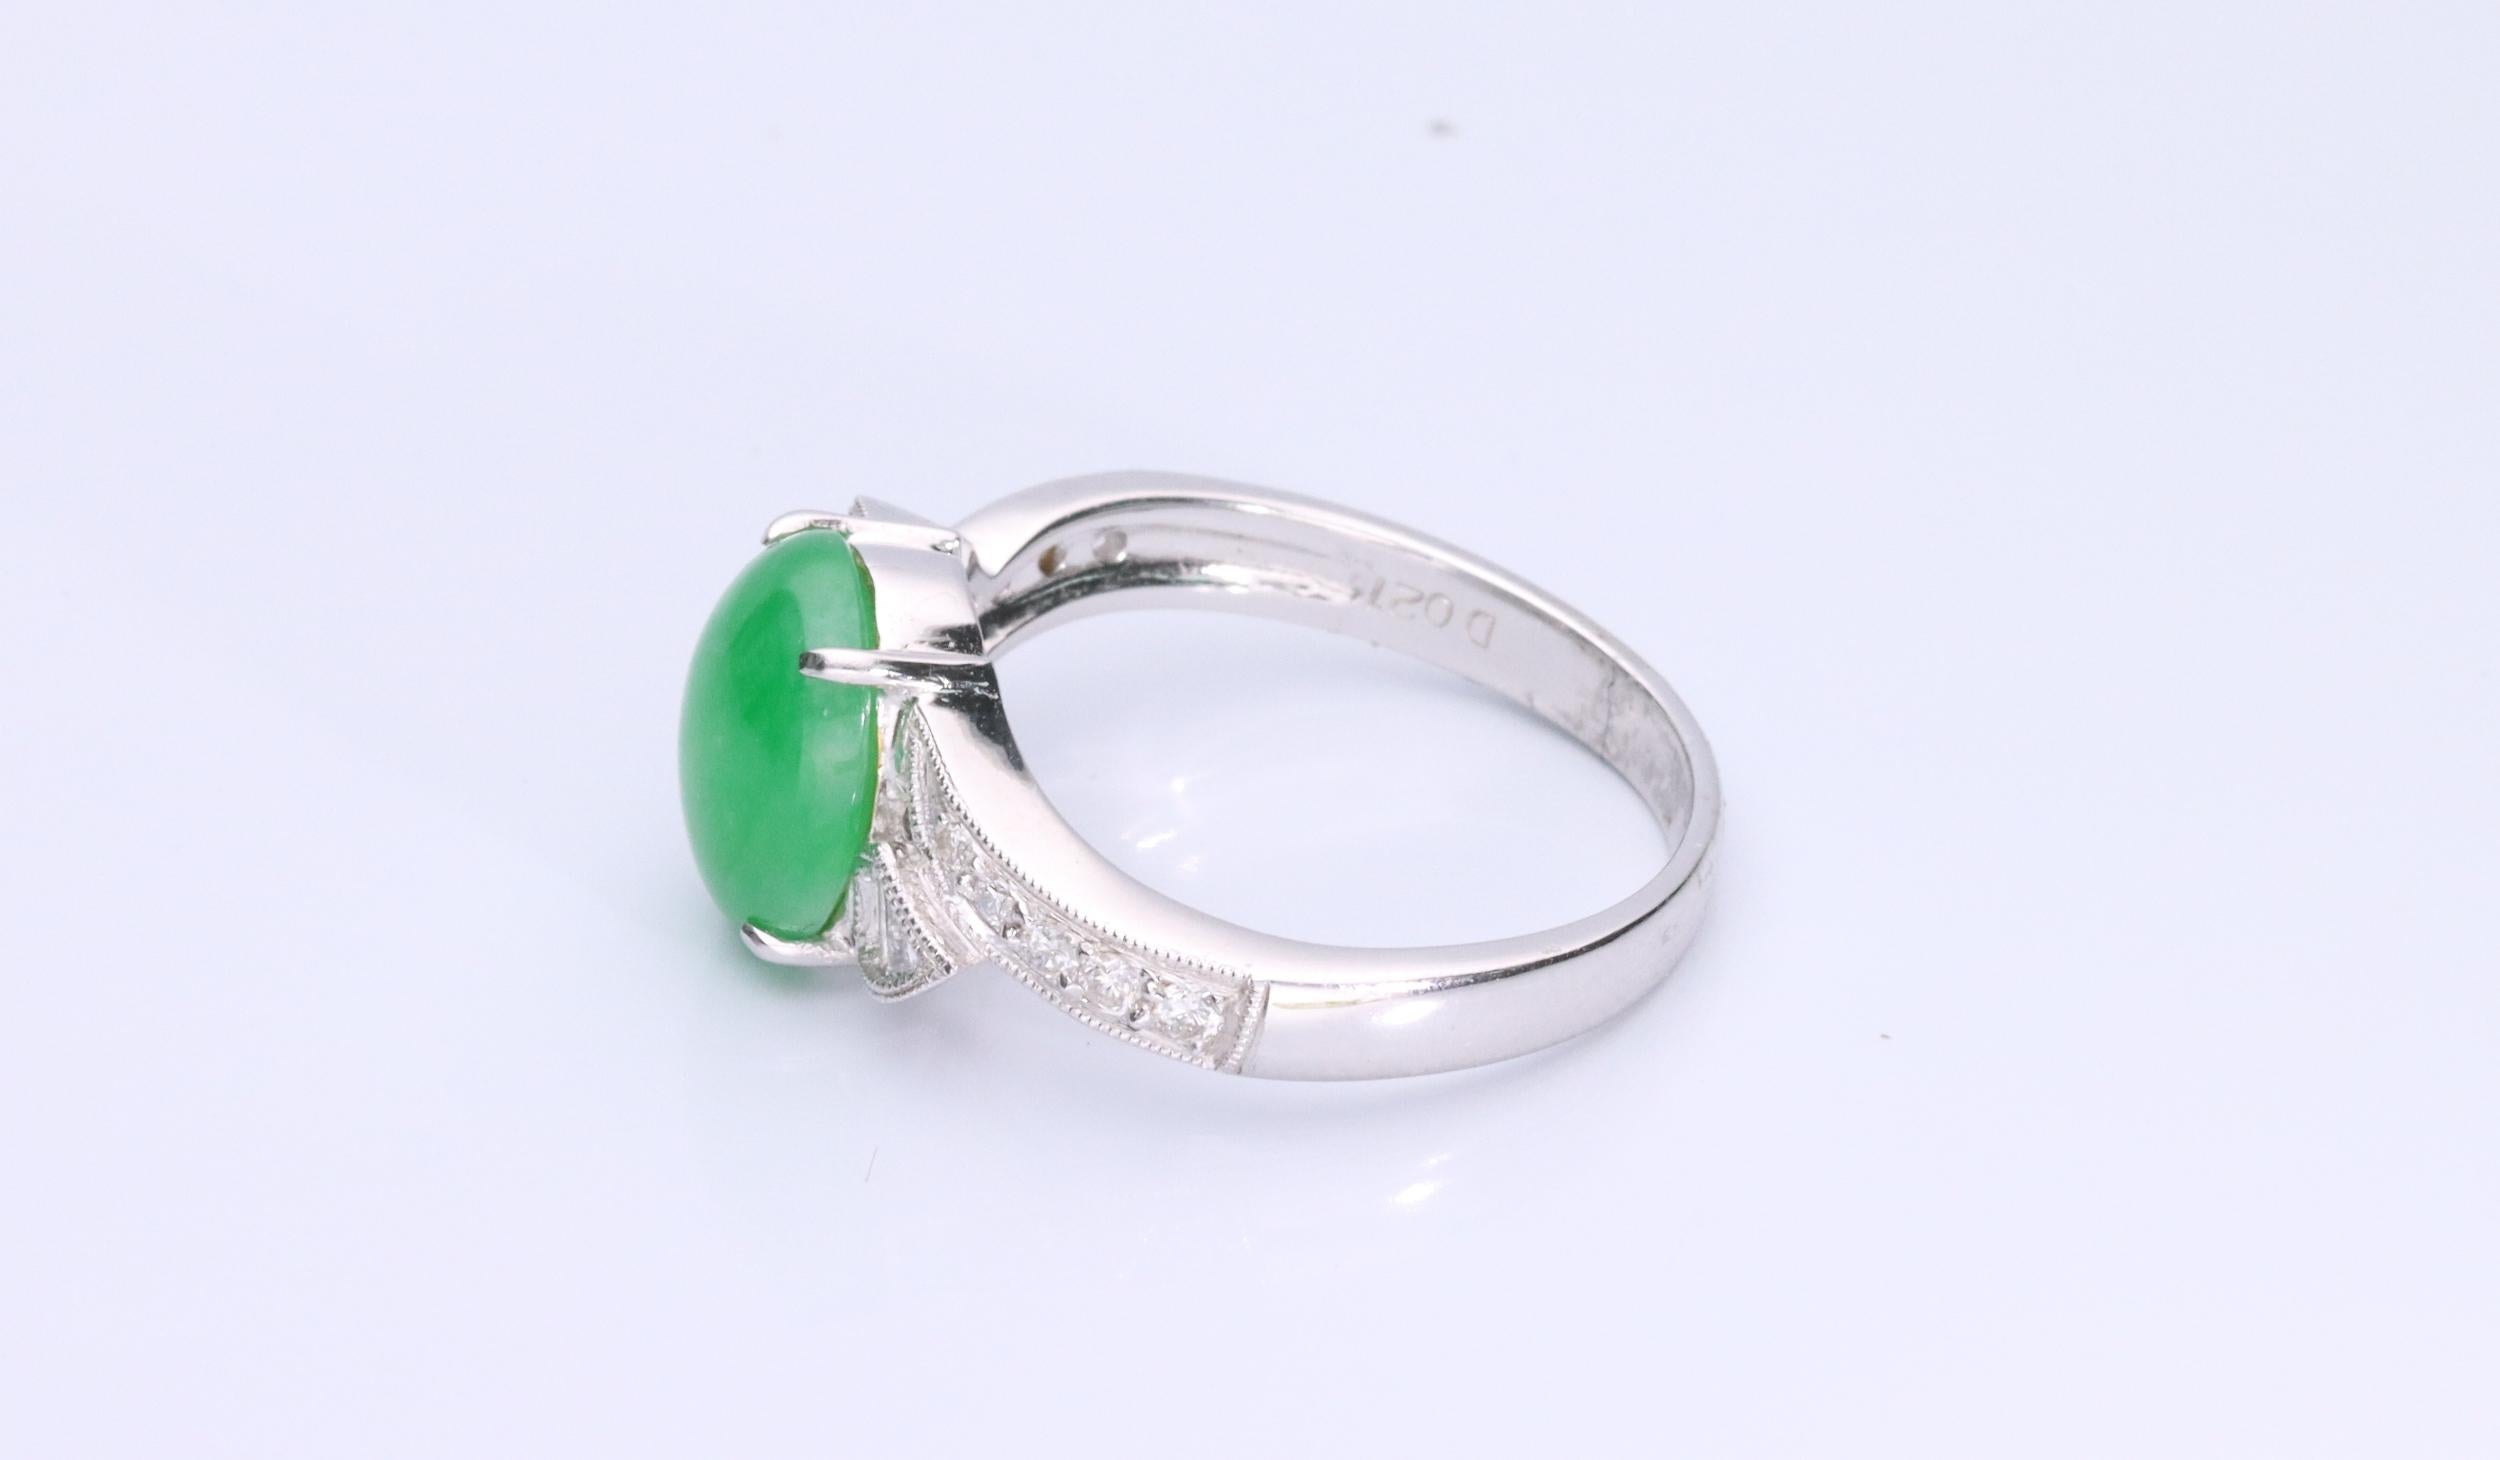 Decorate yourself in elegance with this Ring is crafted from 18-karat White Gold by Gin & Grace. This Ring is made up of Oval-Cab (1 pcs) 2.90 carat Jade and Round-cut White Diamond (10 Pcs) 0.12 carat, Baguette-cut (4 pcs) 0.09 carat. This Ring is